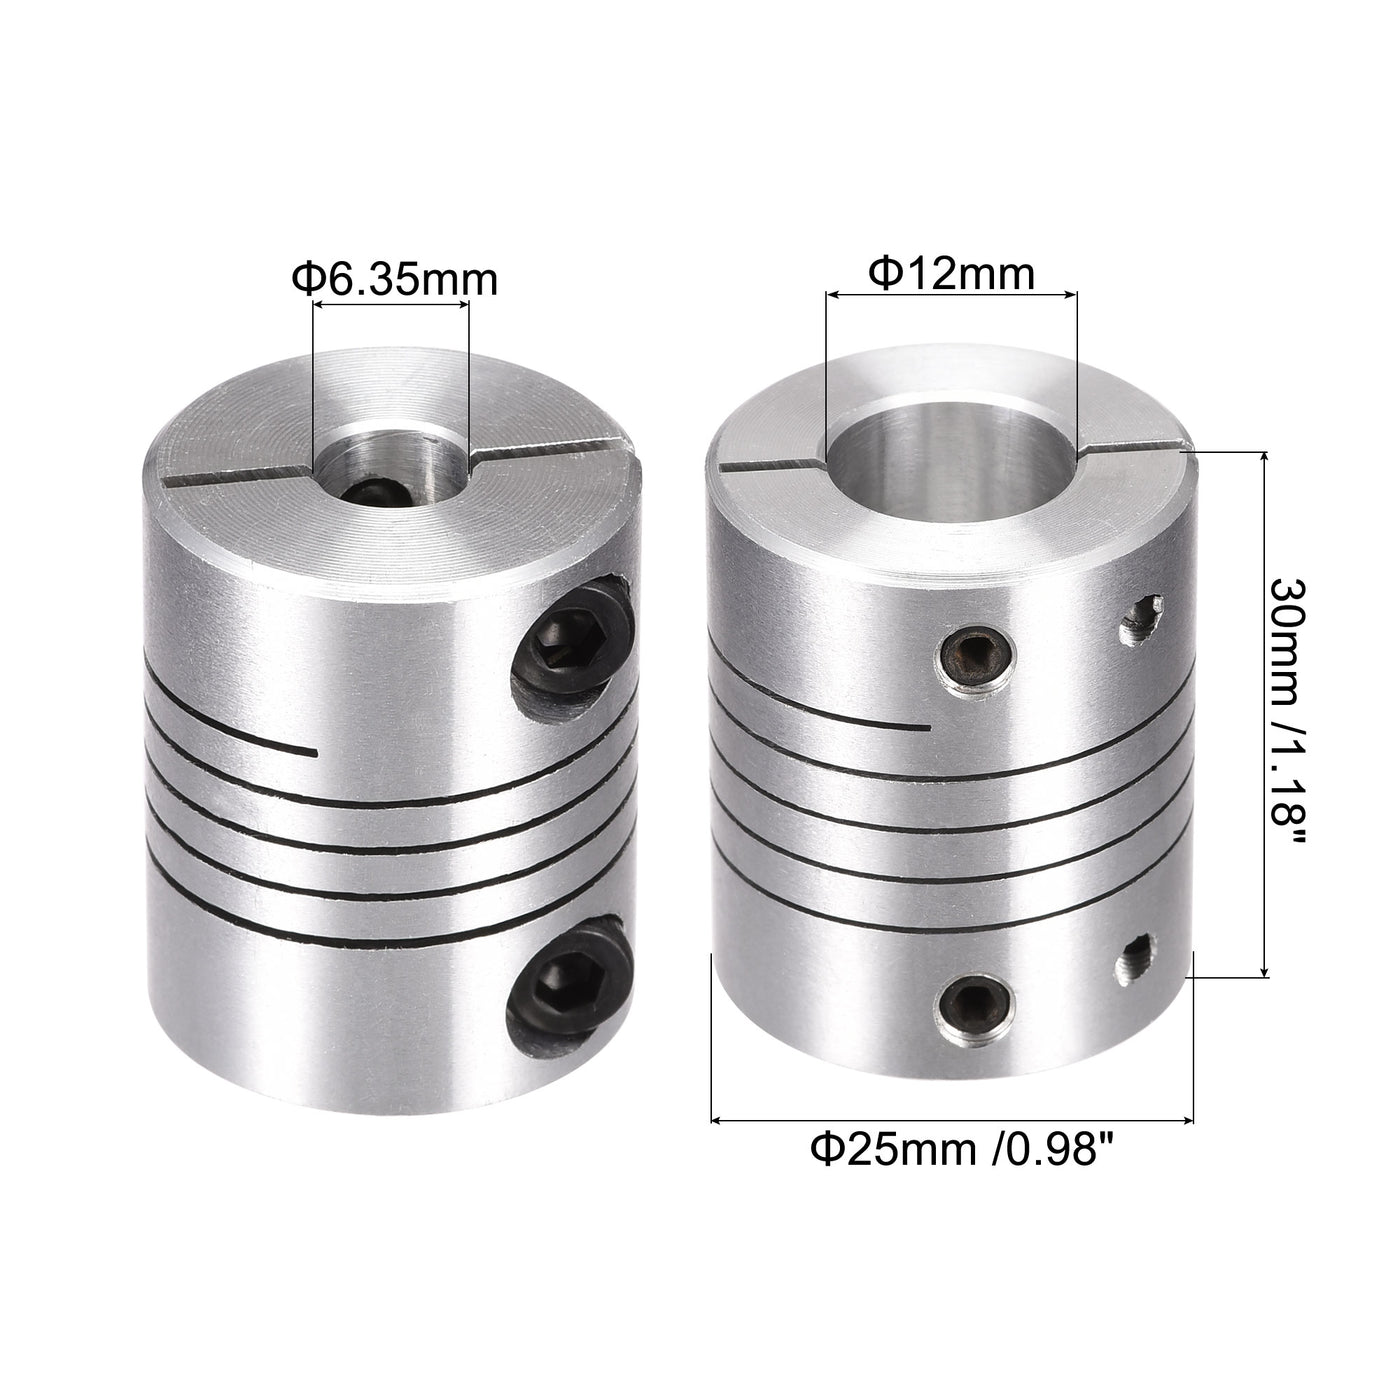 uxcell Uxcell 2PCS Motor Shaft 6.35mm to 12mm Helical Beam Coupler Coupling 25mm Dia 30mm Long